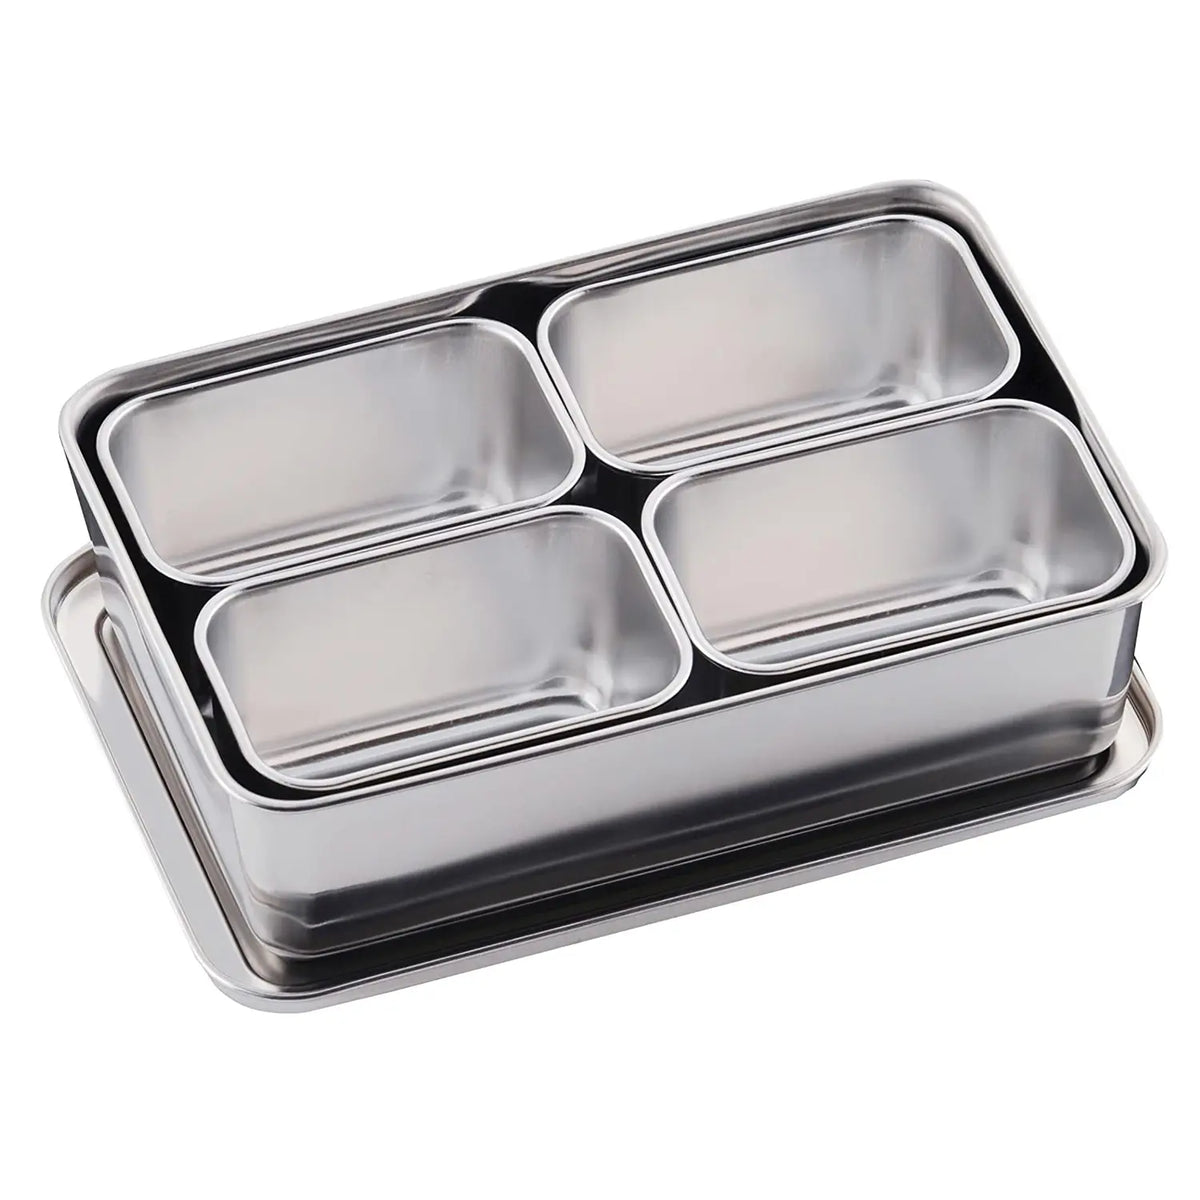 Stainless Steel Yakumi Pan Container with 6 Compartments